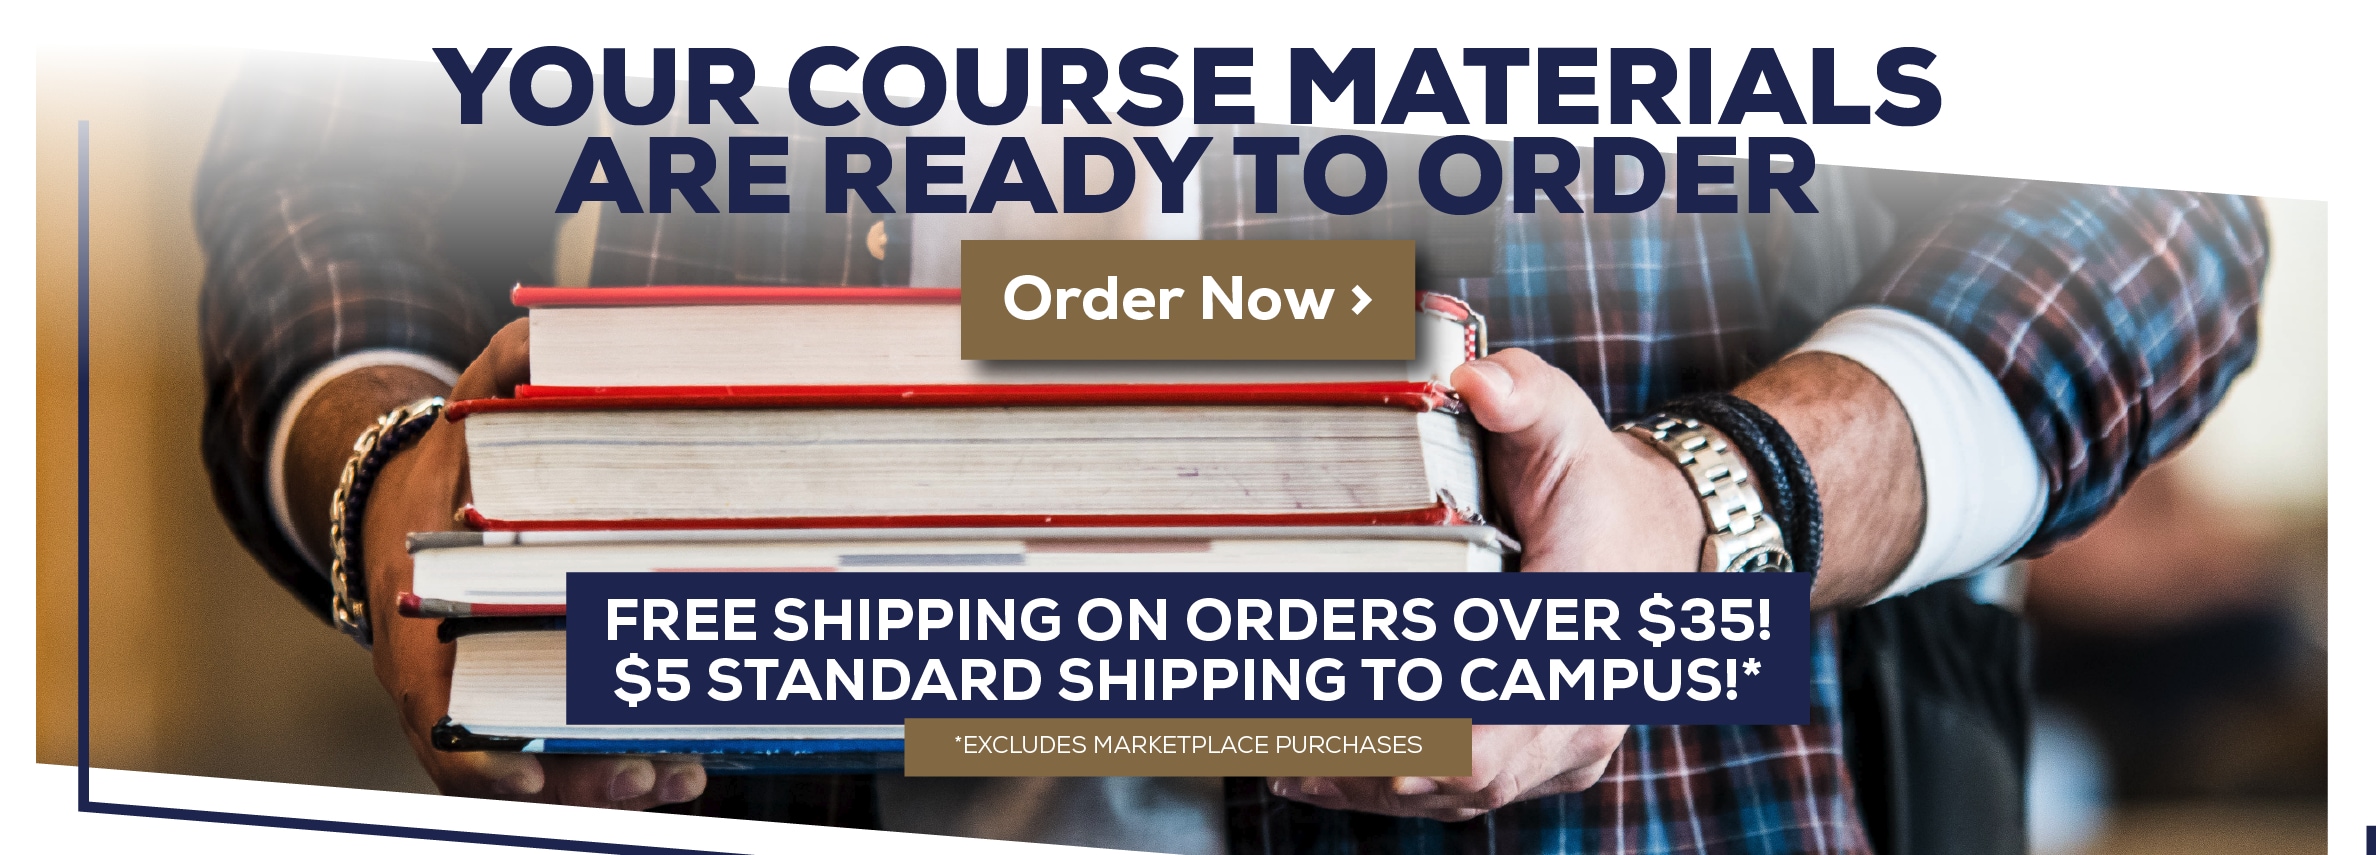 Your Course Materials are Ready to Order. Order Now. Free shipping on orders over $35! $5 Standard Shipping to Campus! *Excludes marketplace purchases.